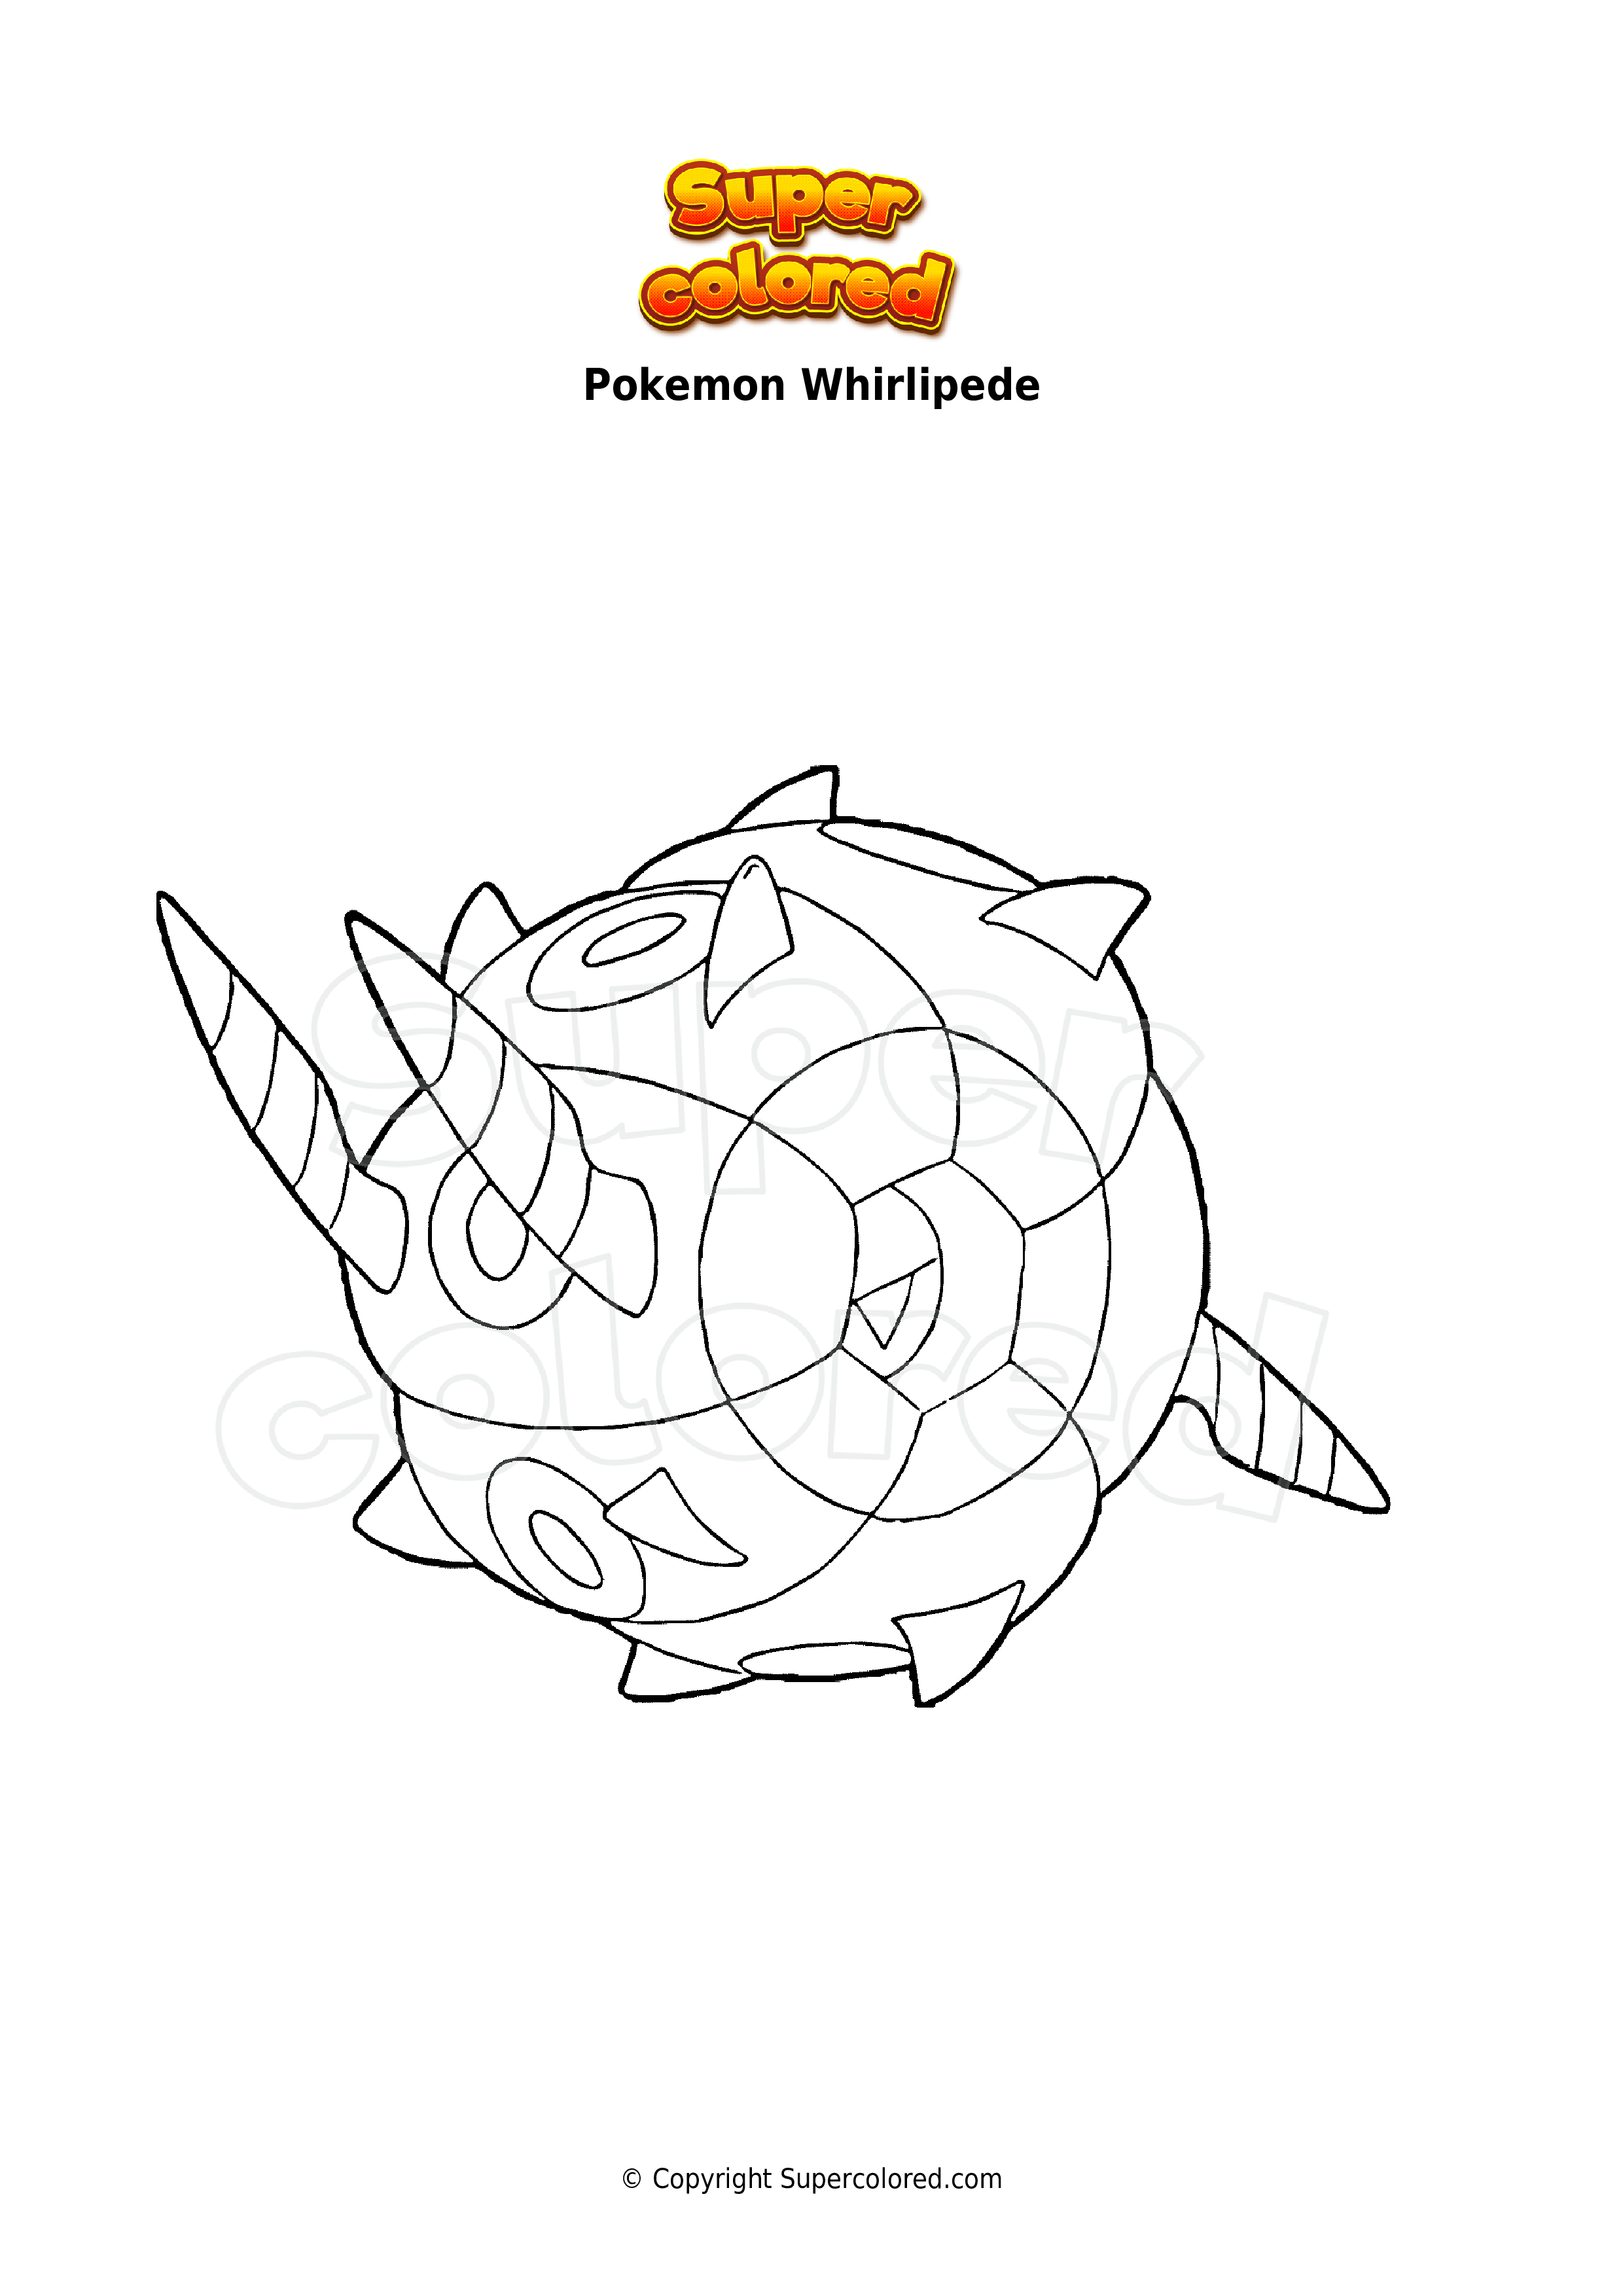 pokemon coloring pages whirlipede to scolipede